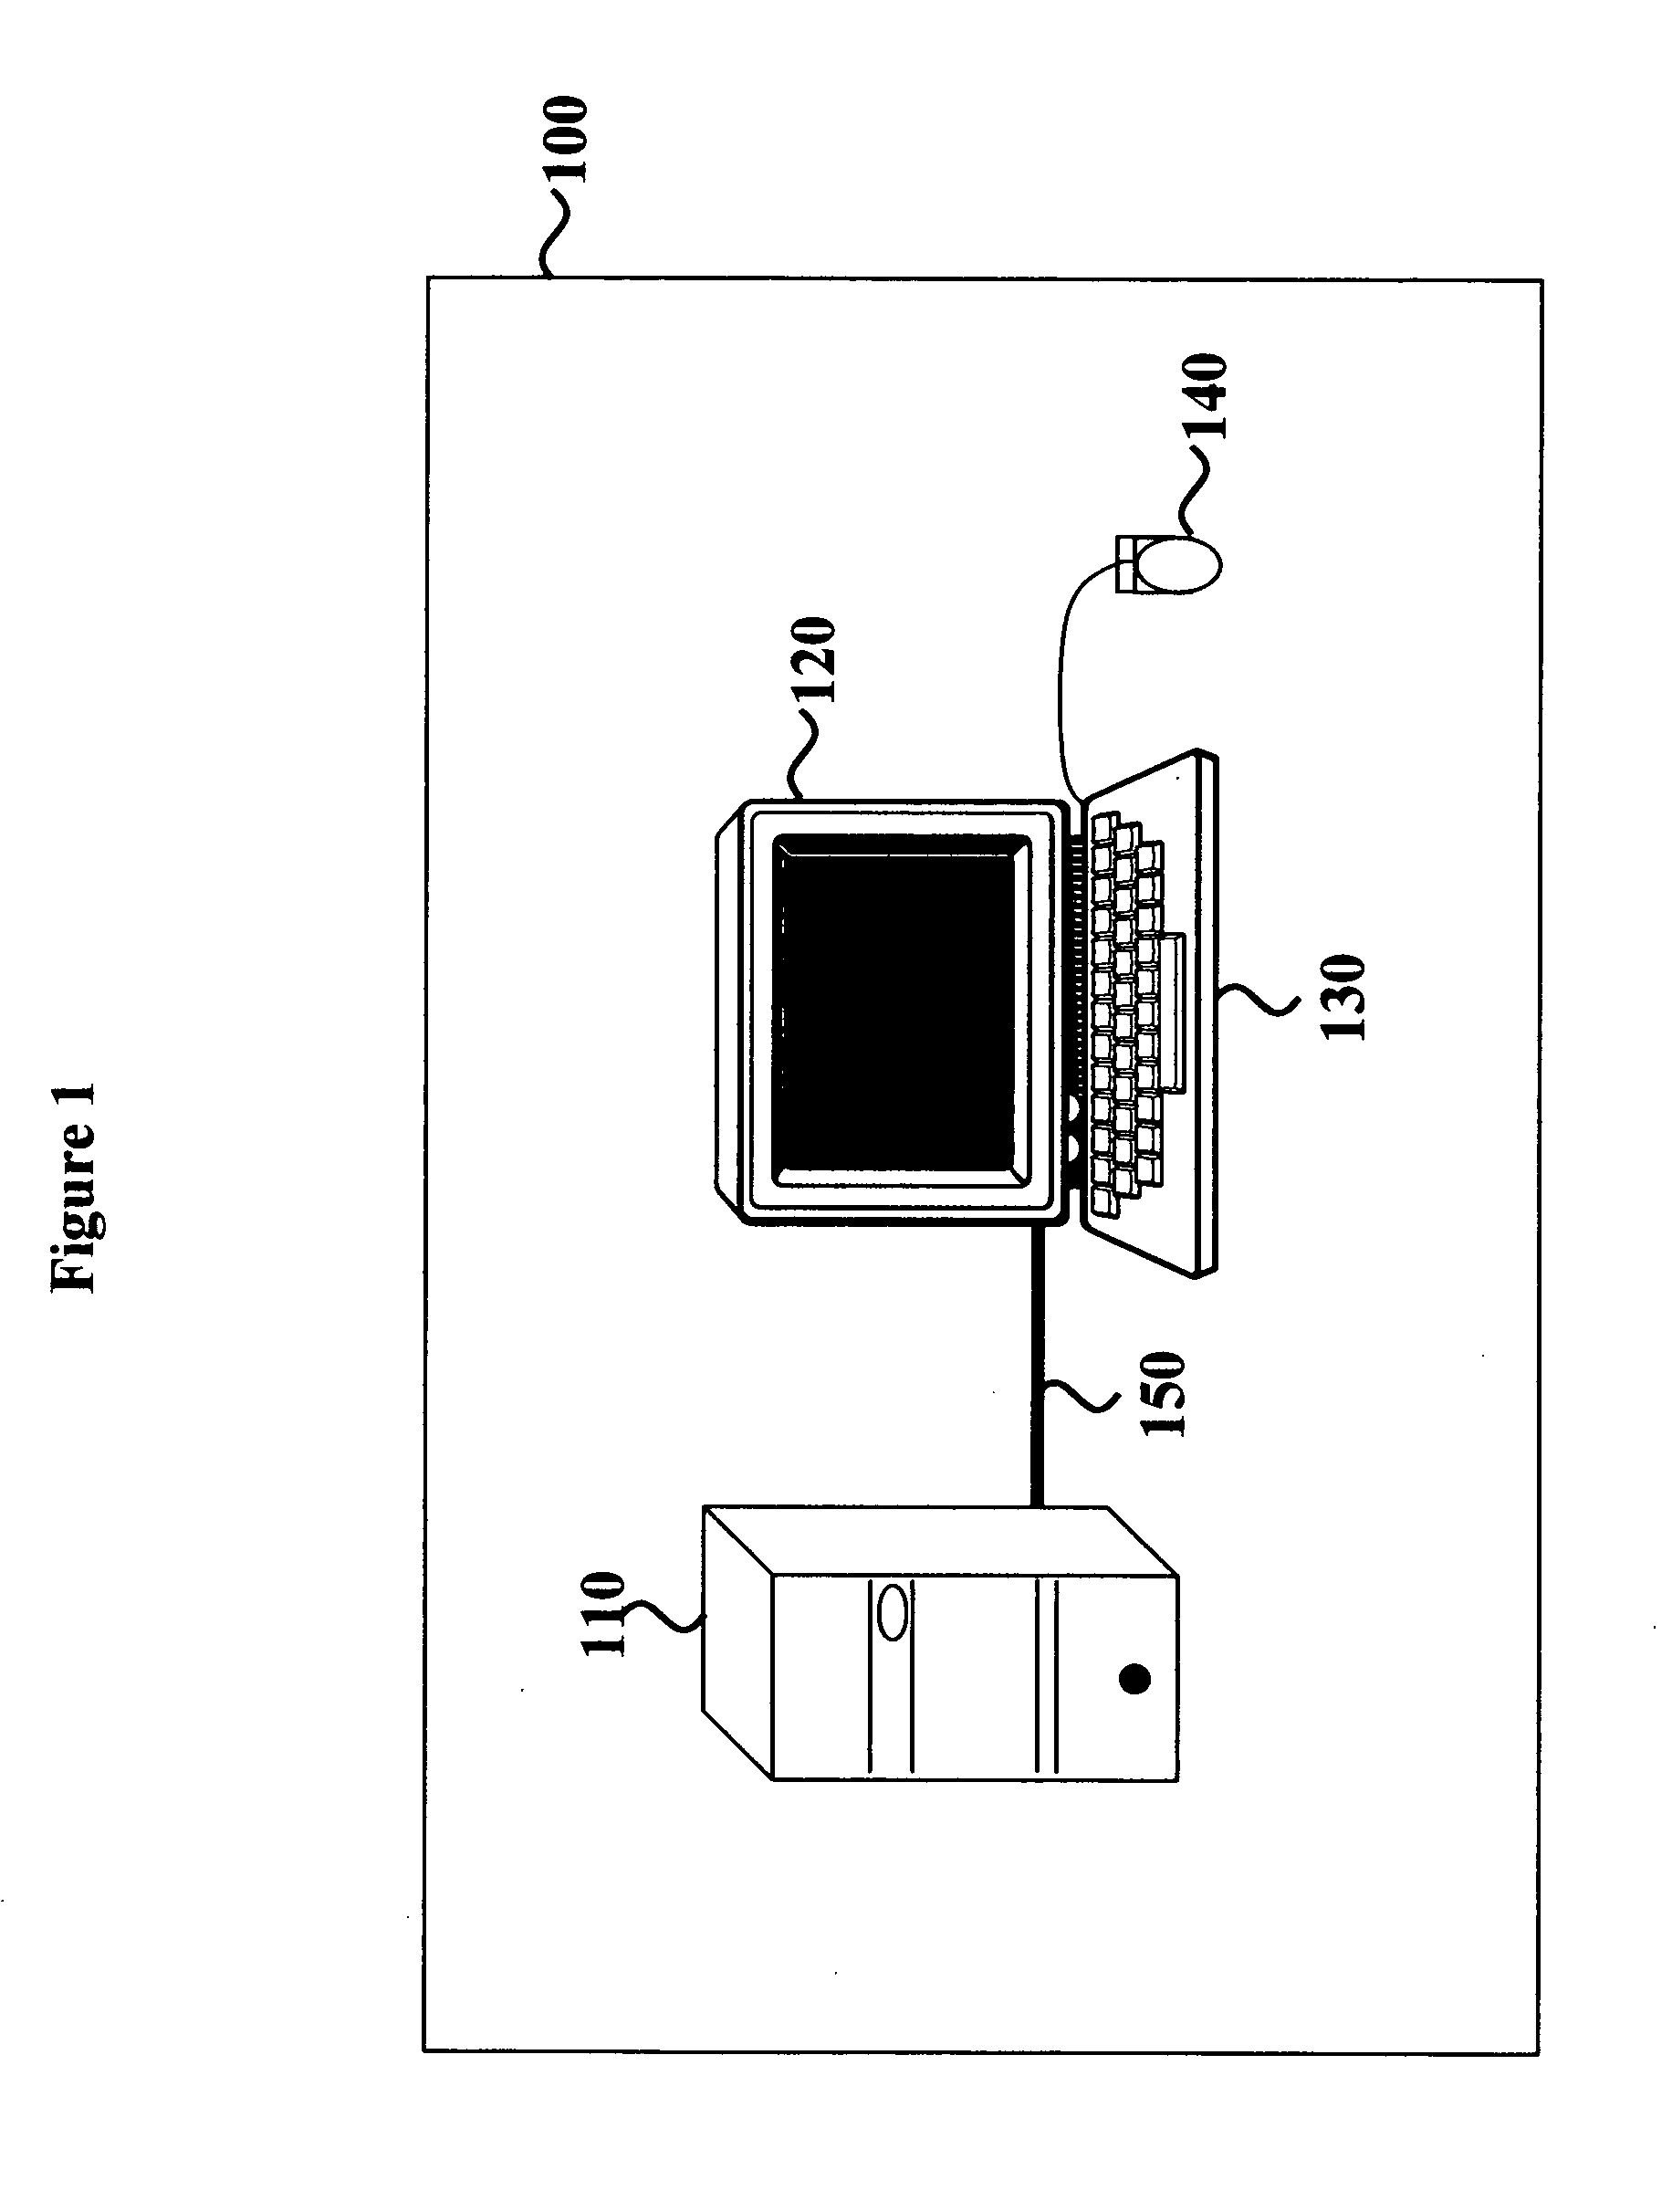 Method and apparatus for execution control of computer programs